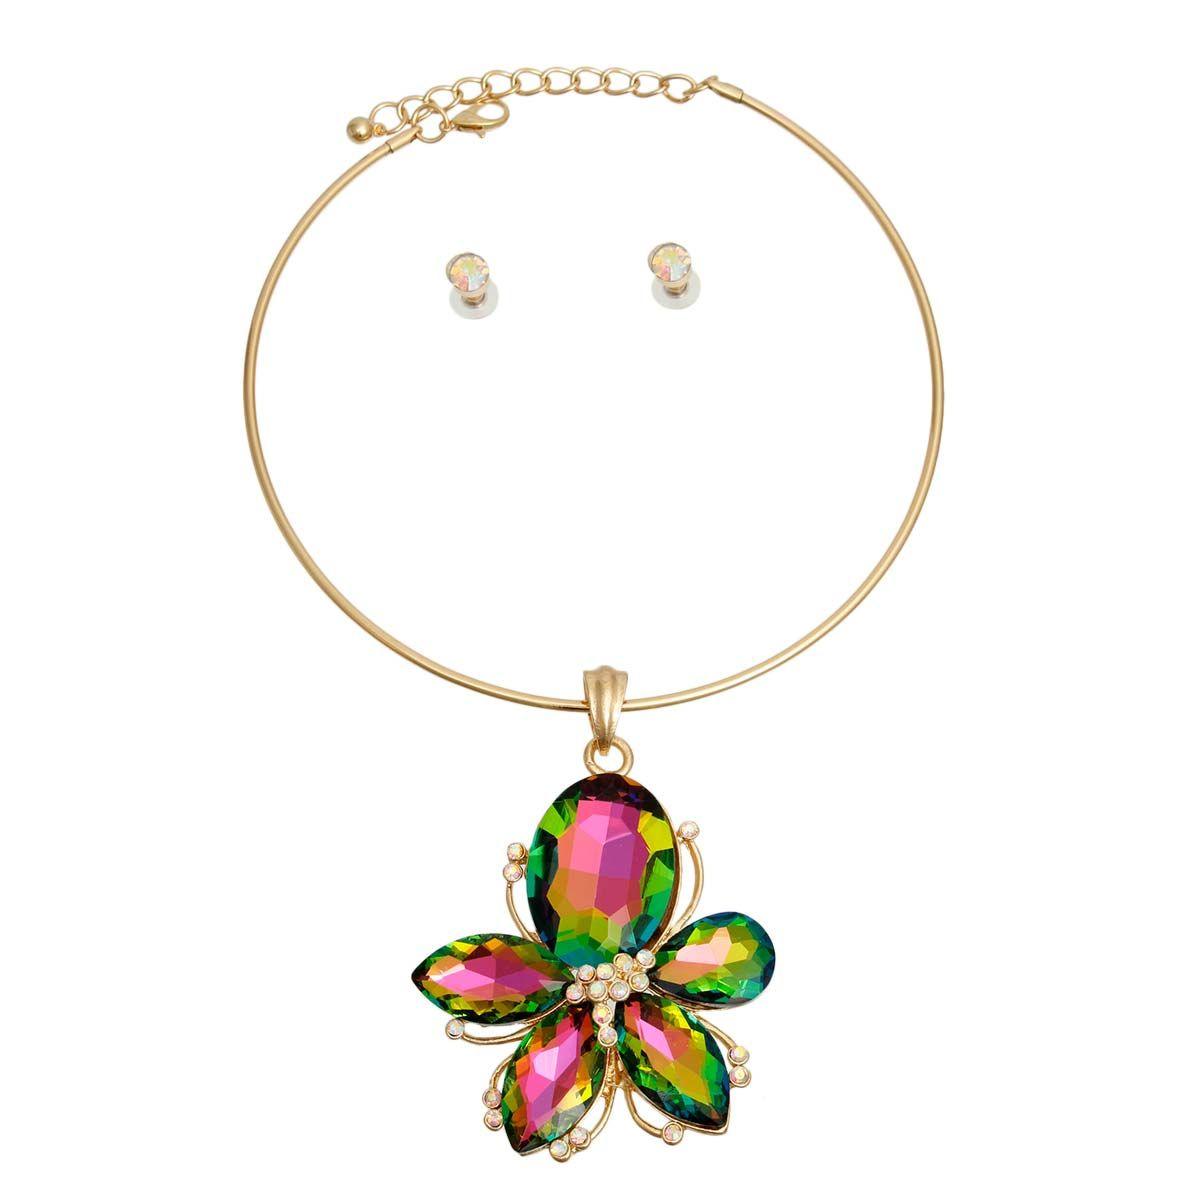 Get Noticed with Combination Pink and Green Flower Necklace